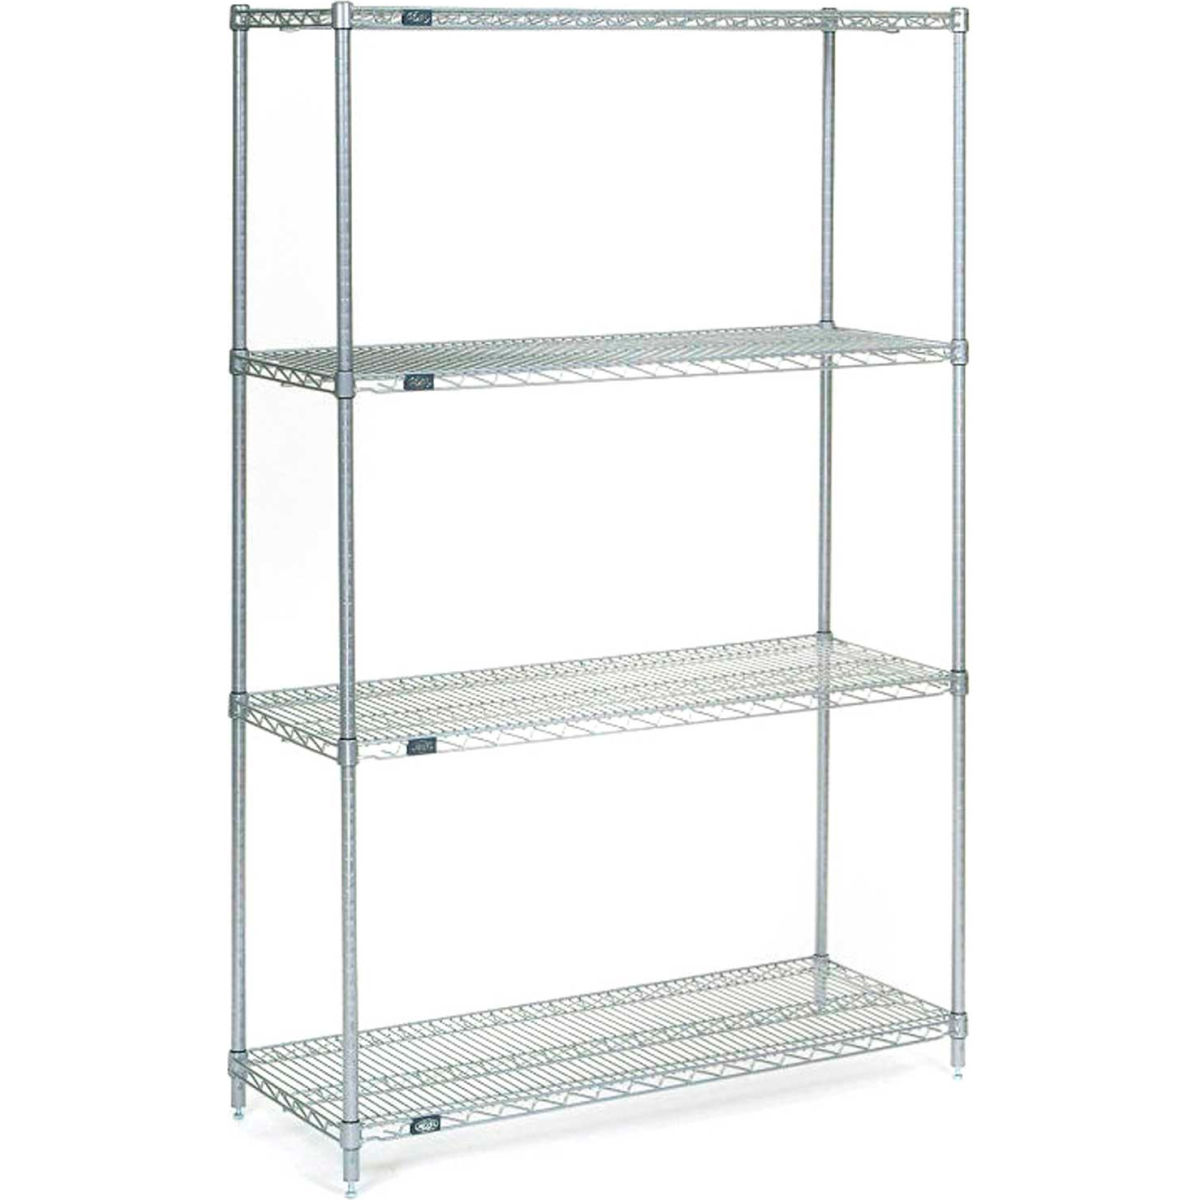 Picture of Global Industrial 14486S5 63 x 48 x 14 in. Nexel Stainless Steel Starter 5 Tier Wire Shelving